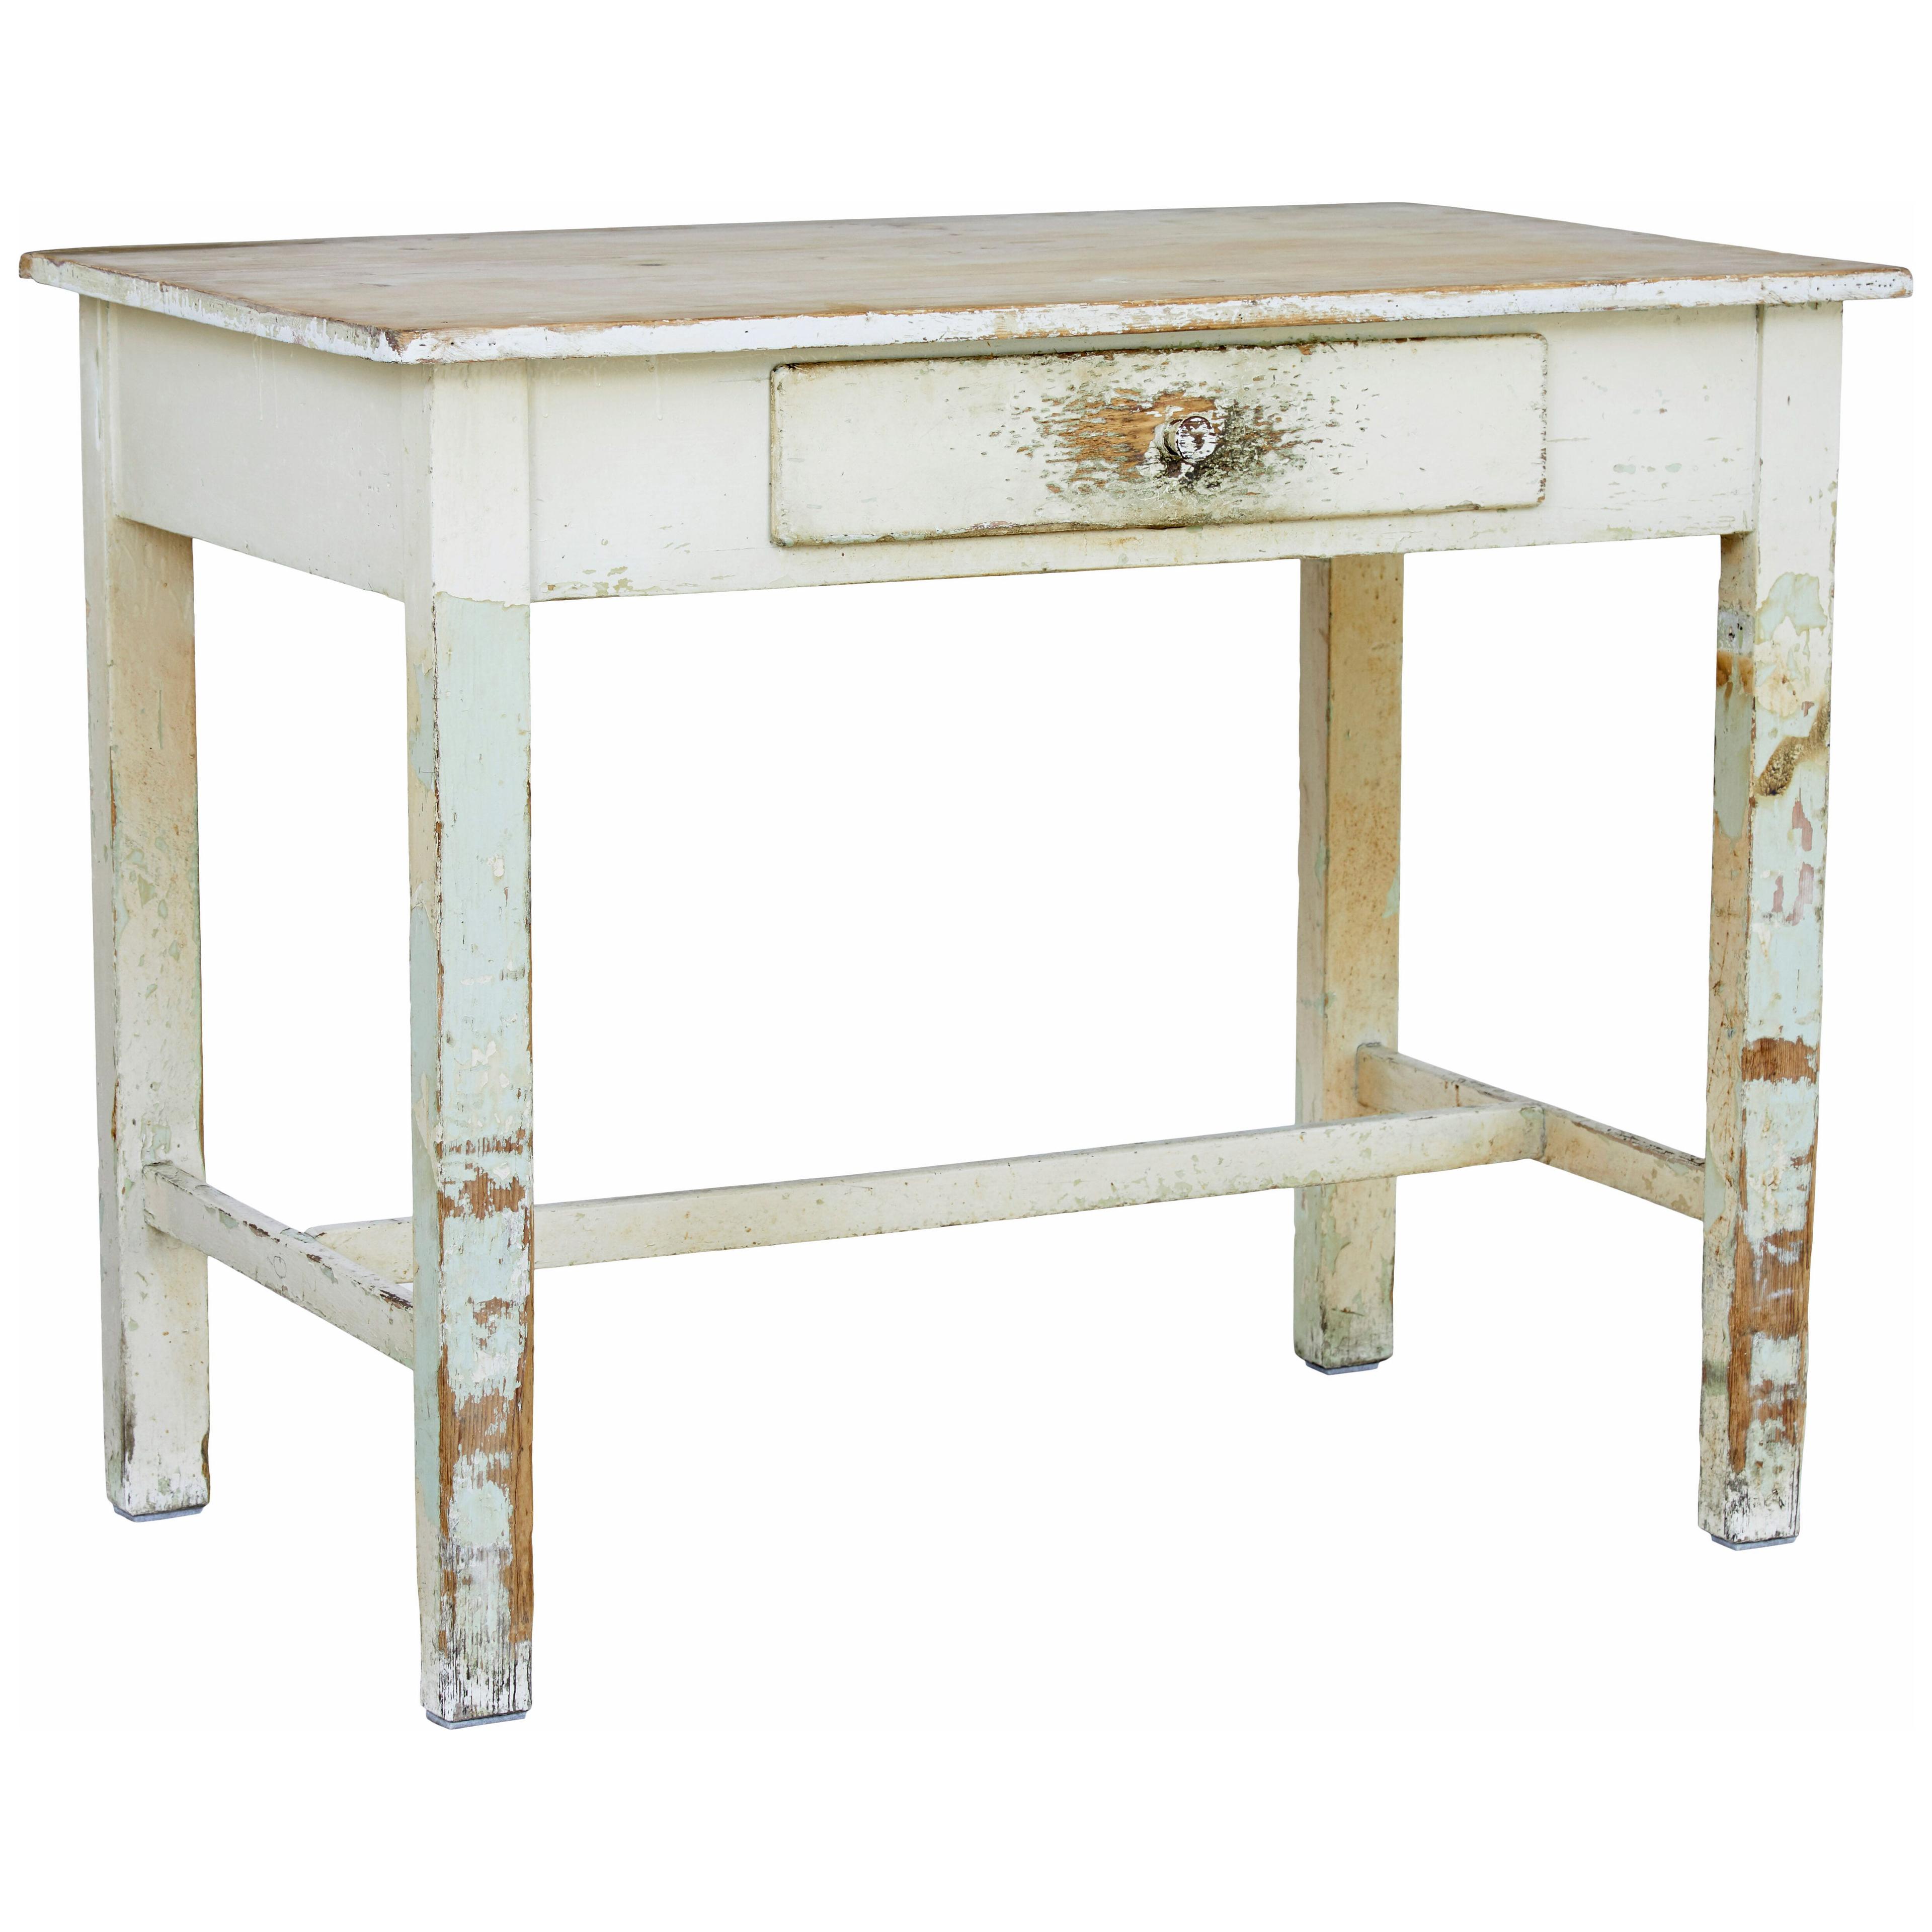 19TH CENTURY PAINTED PINE SIDE TABLE